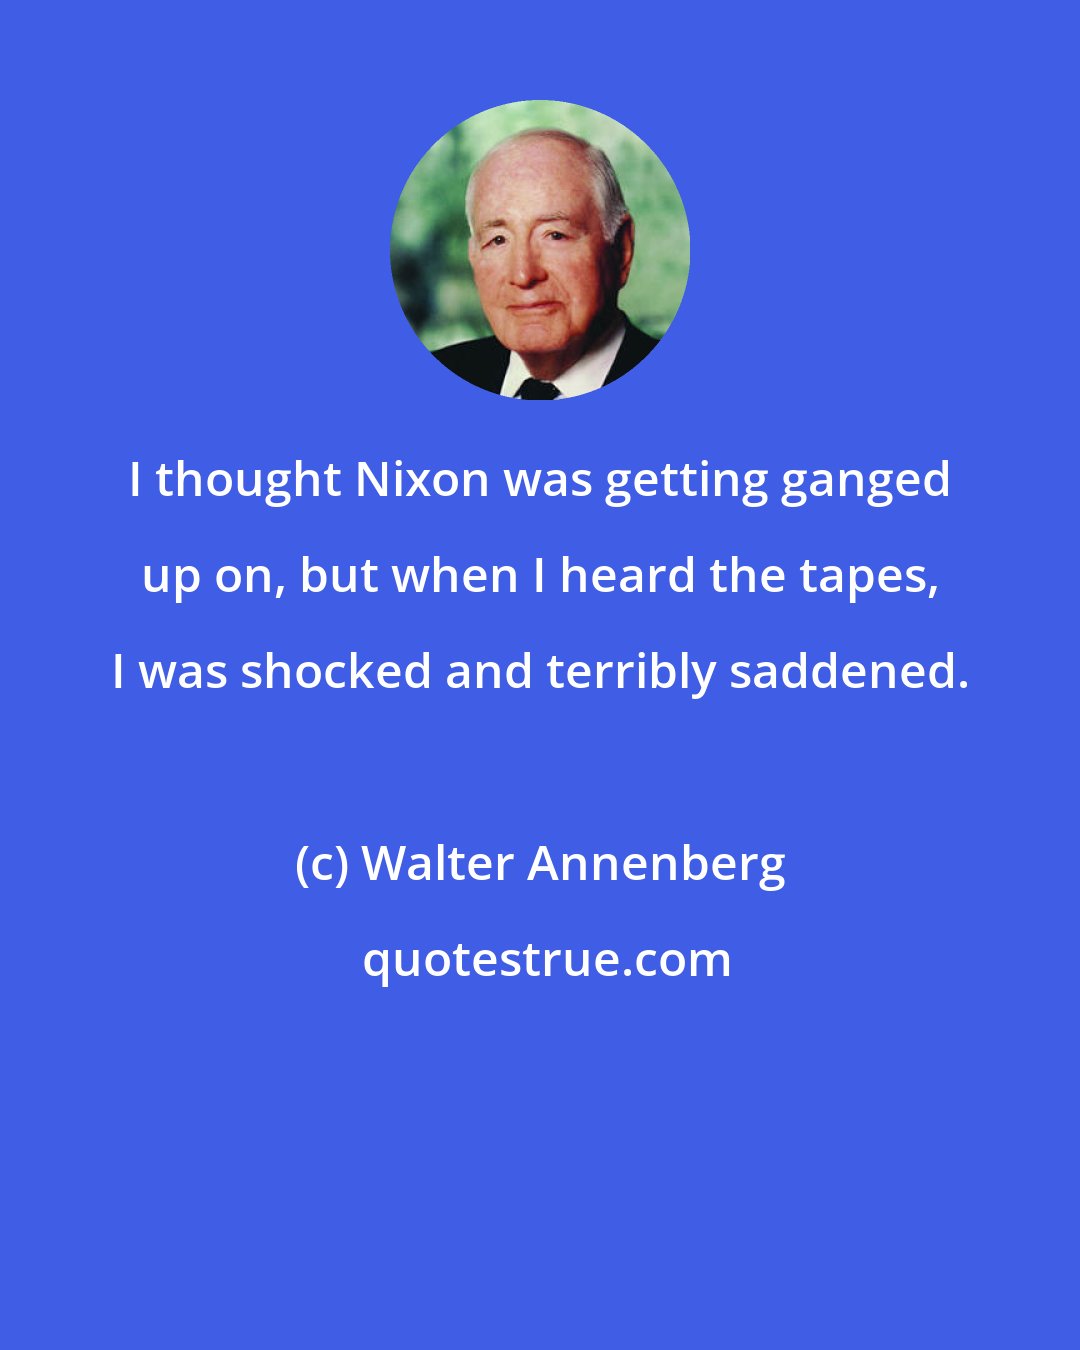 Walter Annenberg: I thought Nixon was getting ganged up on, but when I heard the tapes, I was shocked and terribly saddened.